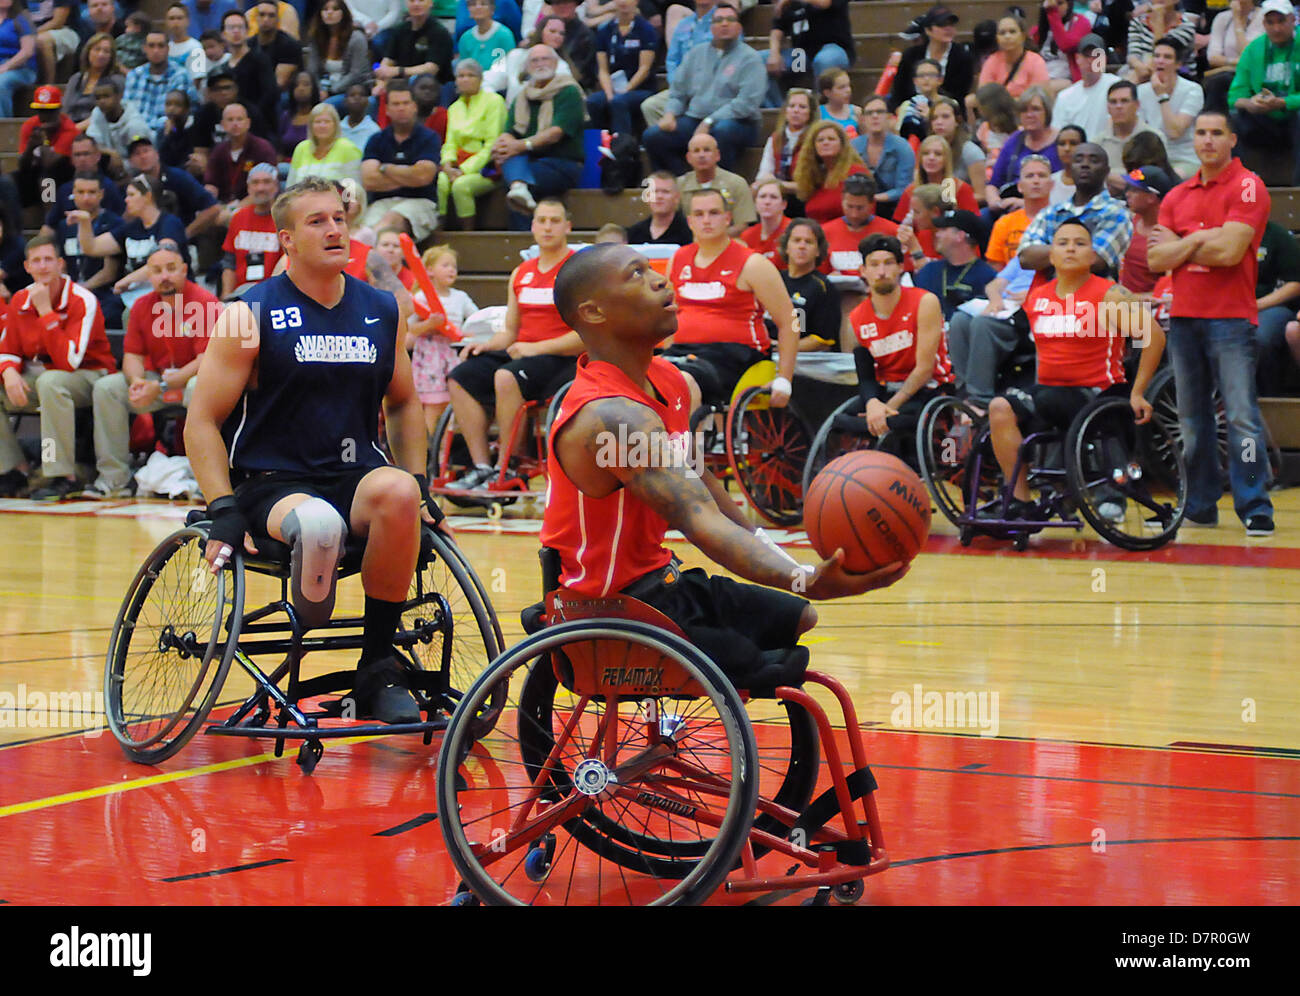 May 12, 2013: Opening round wheelchair basketball action between the Marine Corps and Navy/Coast Guard during the first day of Warrior Games competition at the United States Olympic Training Center, Colorado Springs, Colorado. Over 260 injured and disabled service men and women have gathered in Colorado Springs to compete in seven sports, May 11-16. All branches of the military are represented, including Special Operations and members of the British Armed Forces. Stock Photo